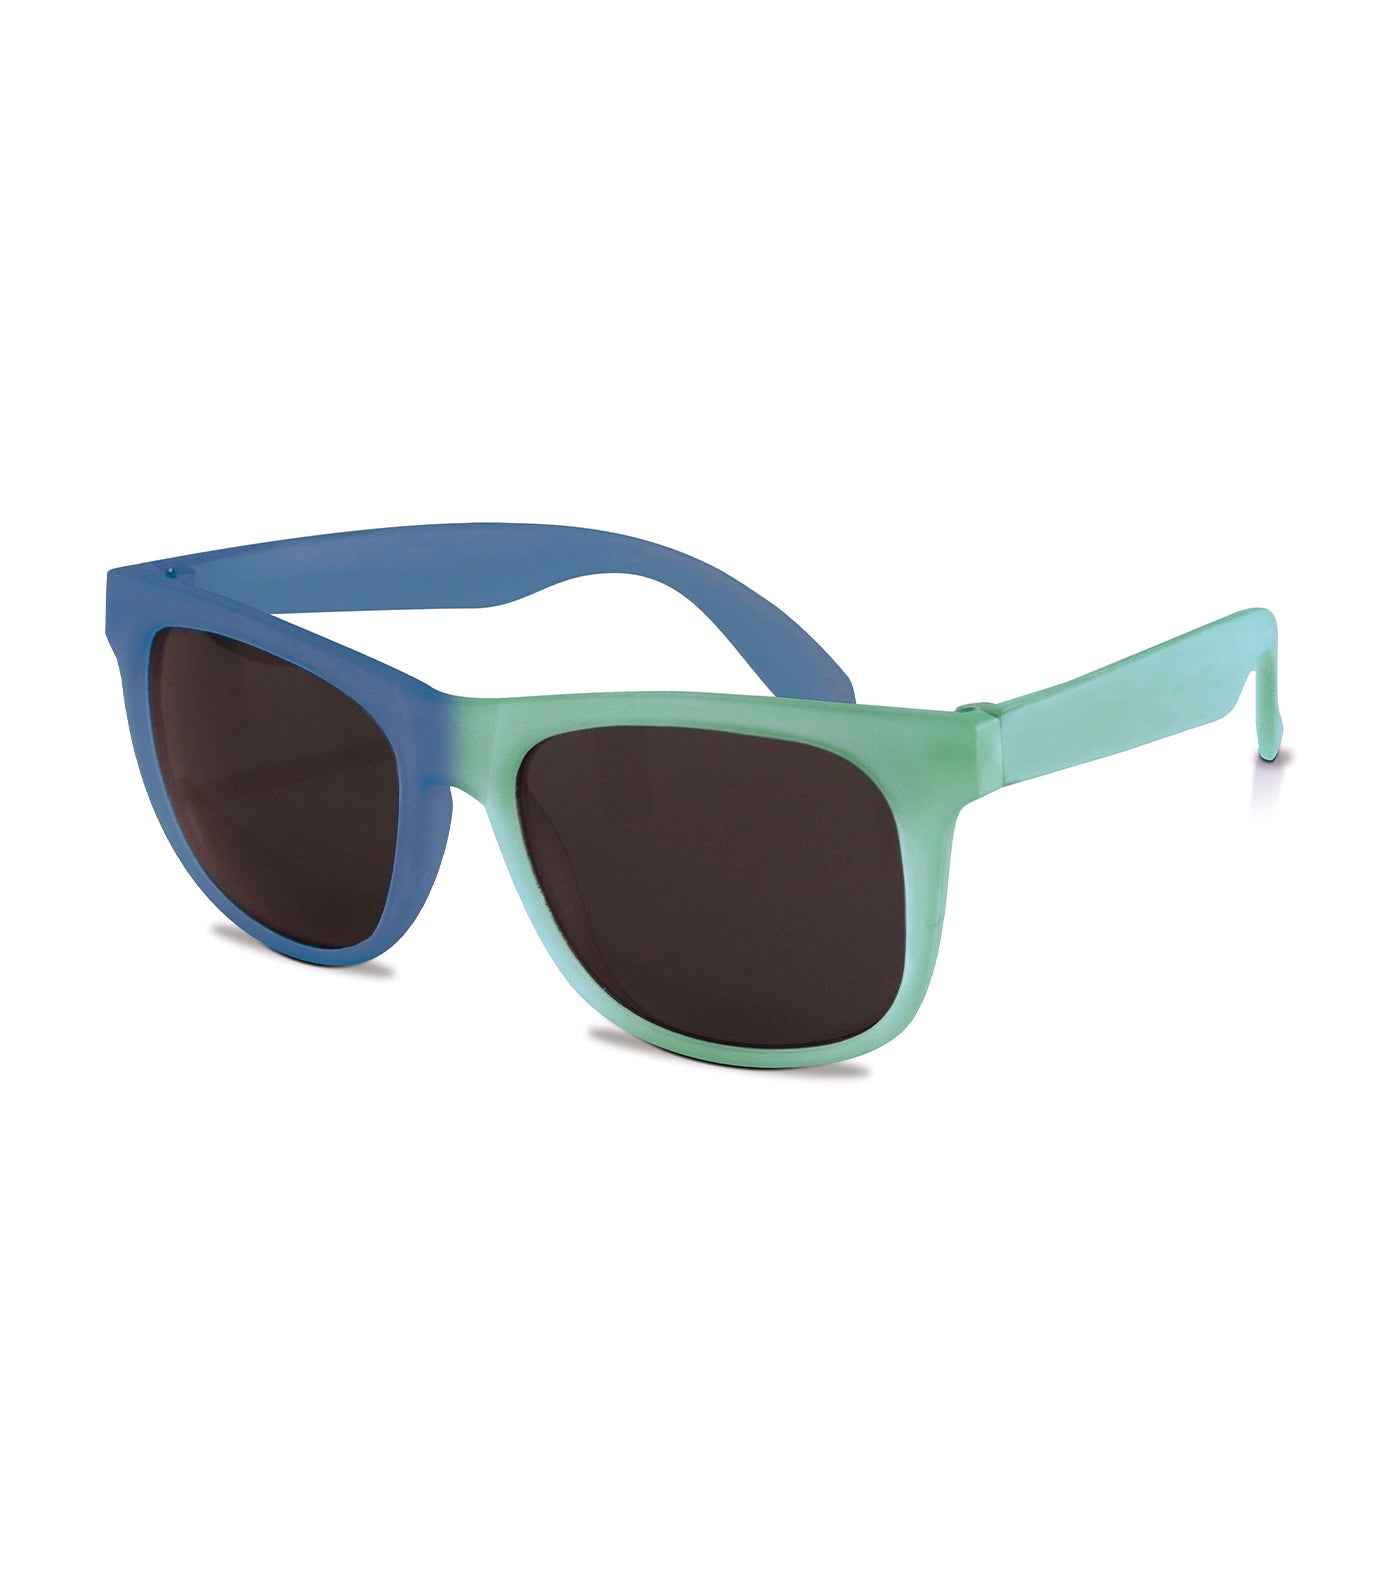 real shades light green to blue switch color-changing sunglasses